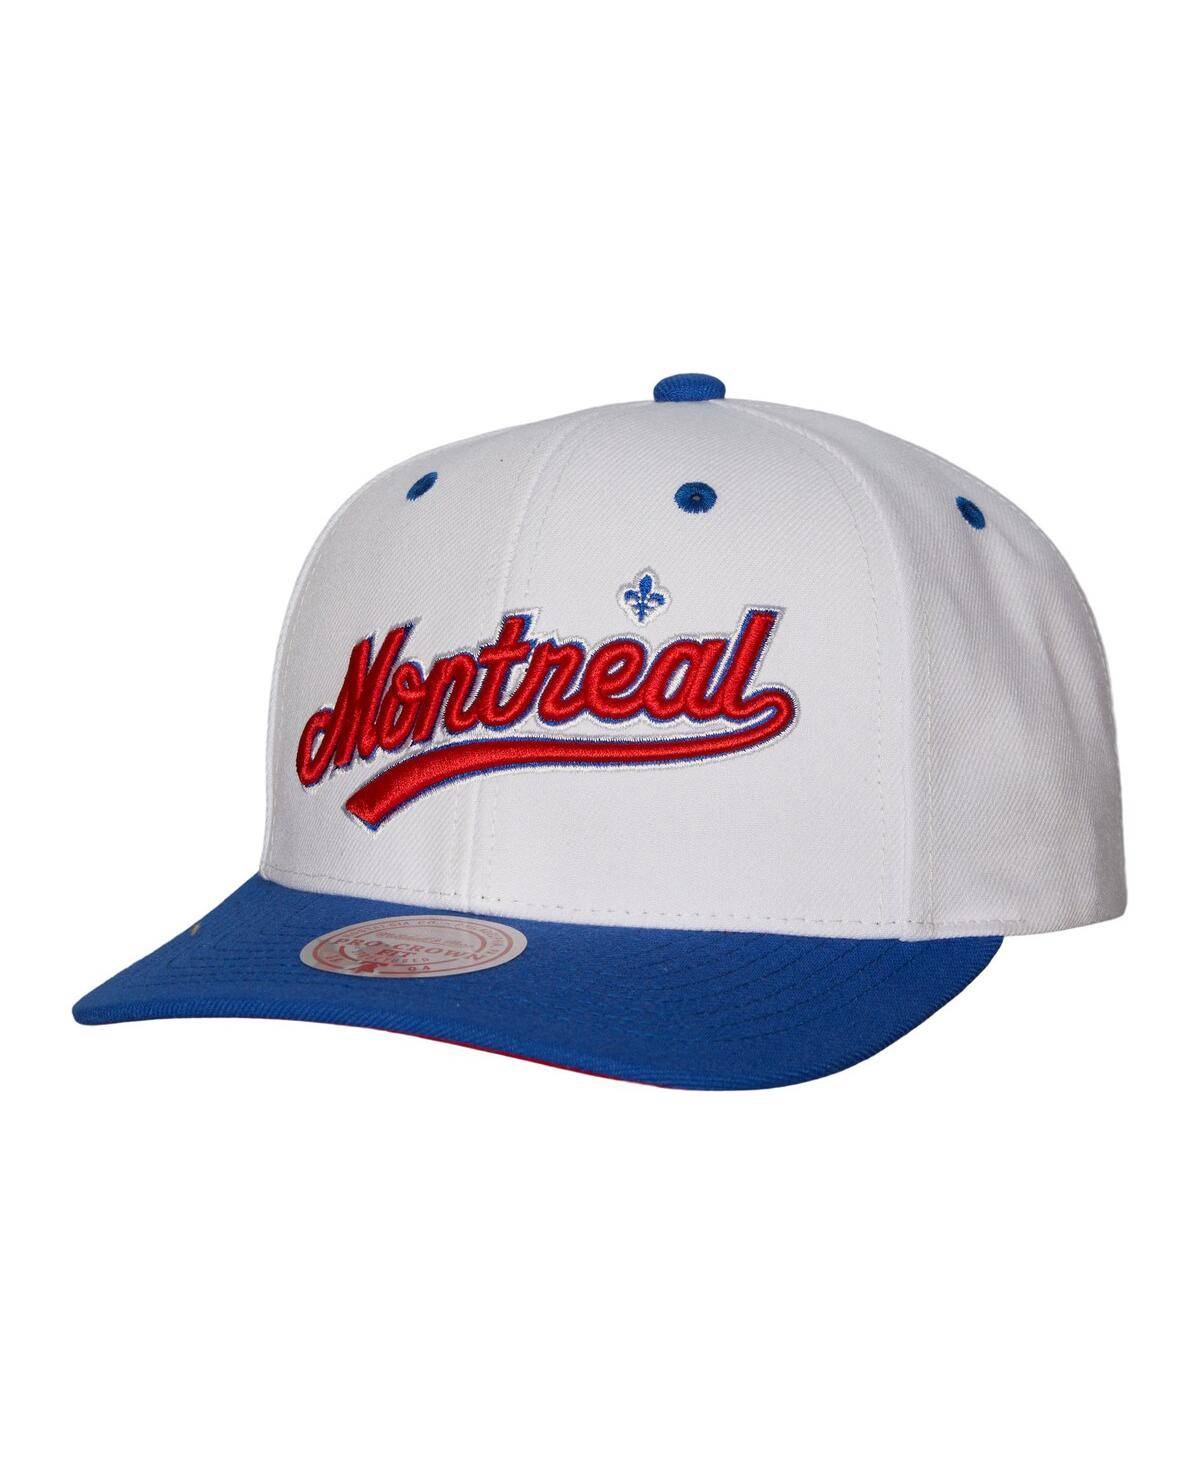 Mitchell & Ness Men's  White Montreal Expos Cooperstown Collection Pro Crown Snapback Hat